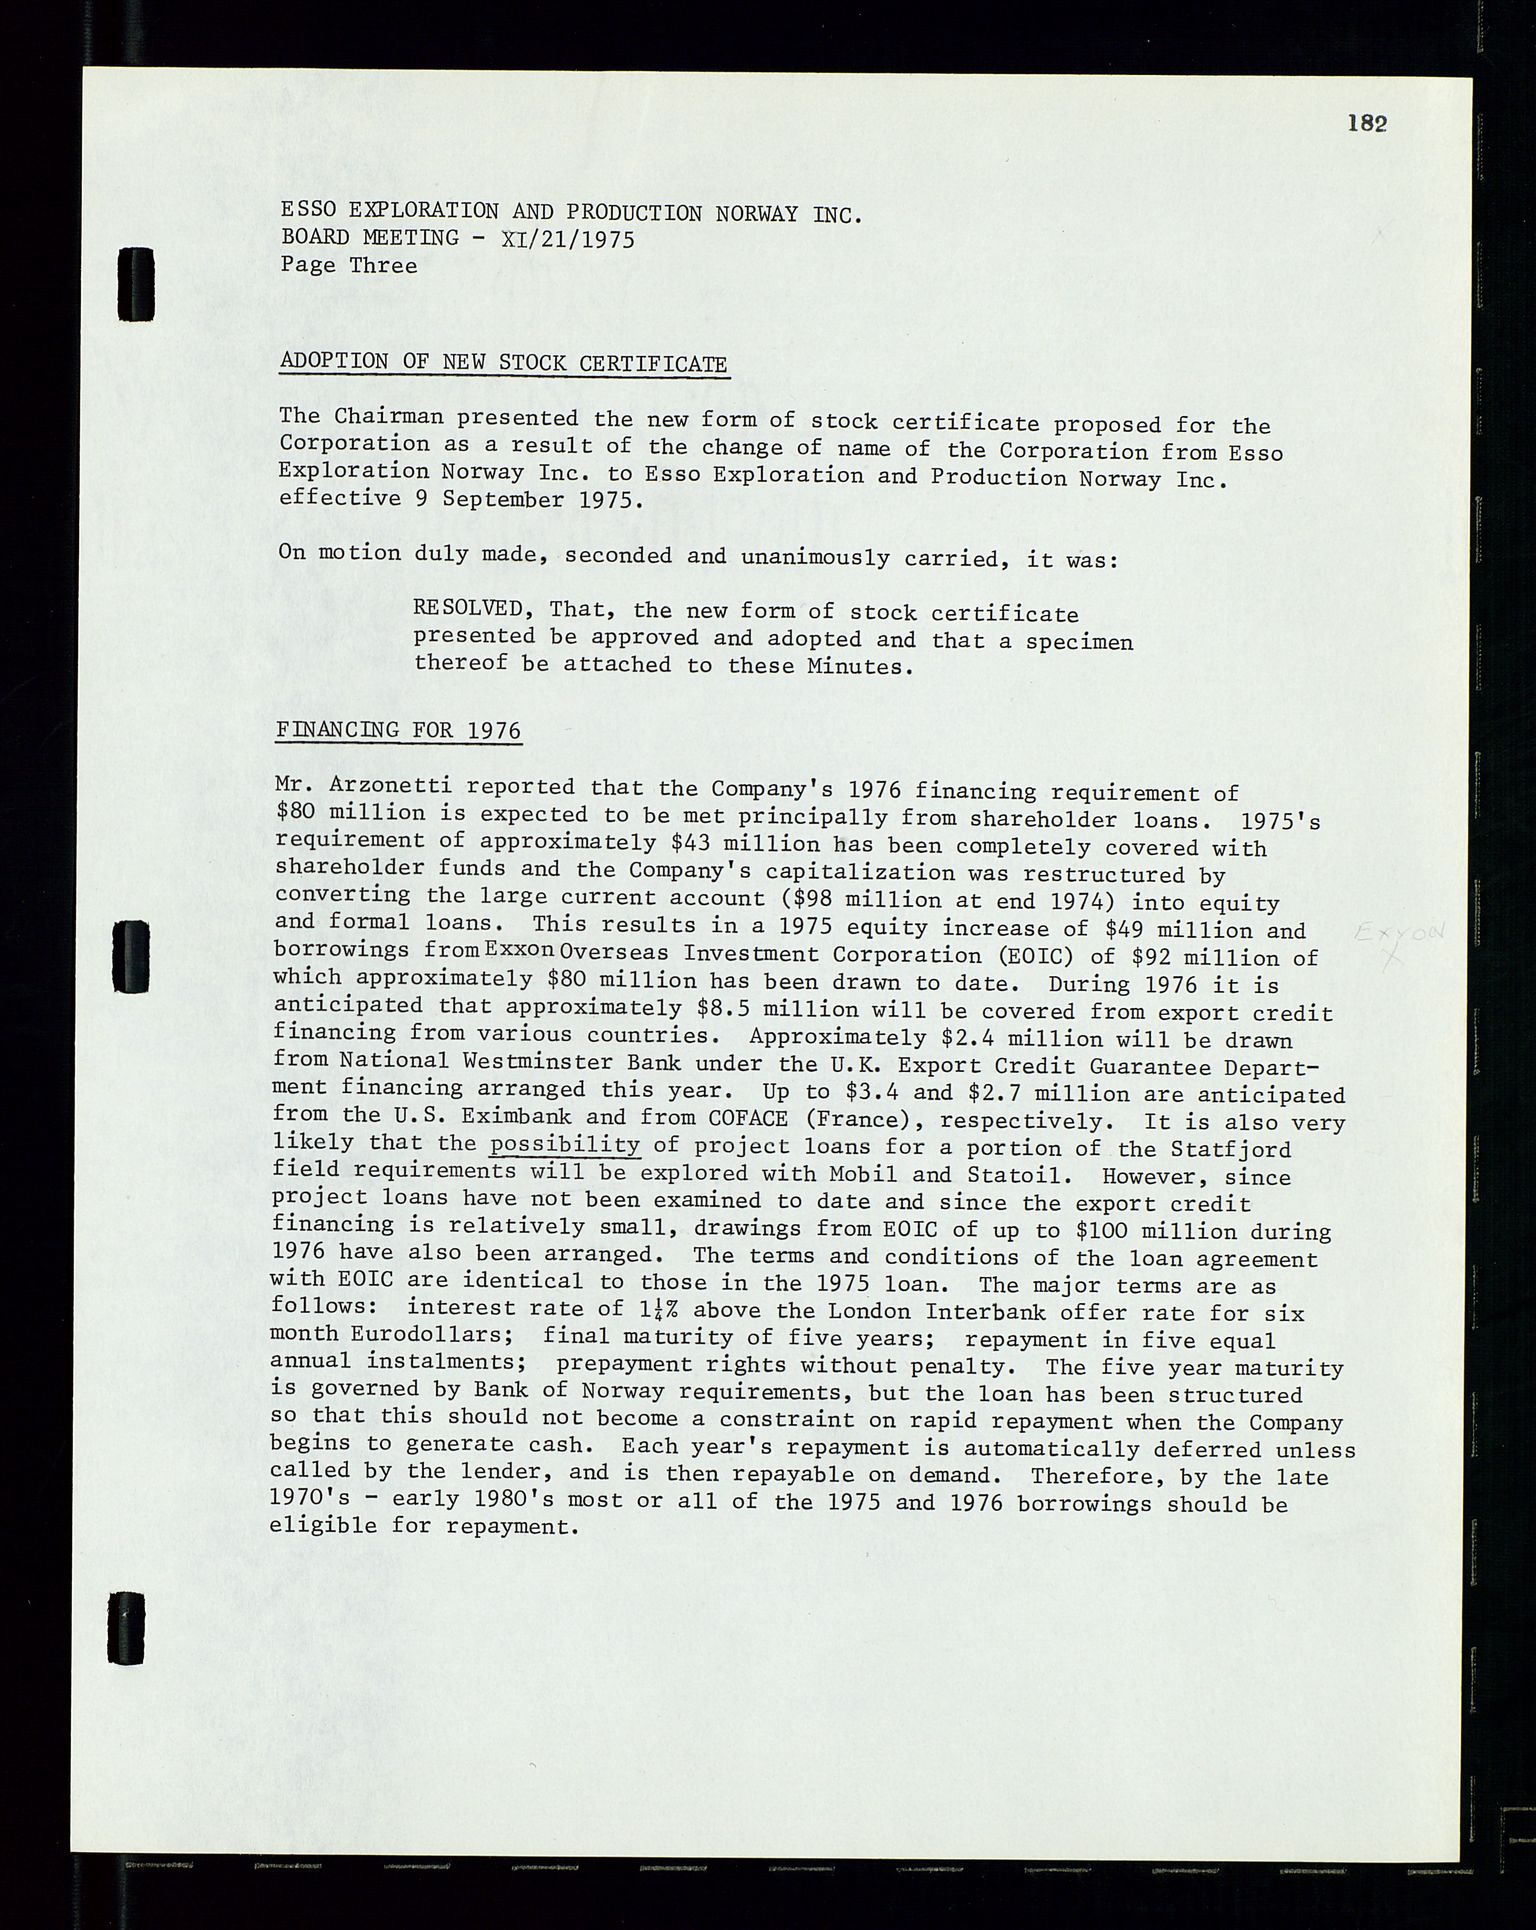 Pa 1512 - Esso Exploration and Production Norway Inc., SAST/A-101917/A/Aa/L0001/0002: Styredokumenter / Corporate records, Board meeting minutes, Agreements, Stocholder meetings, 1975-1979, p. 20